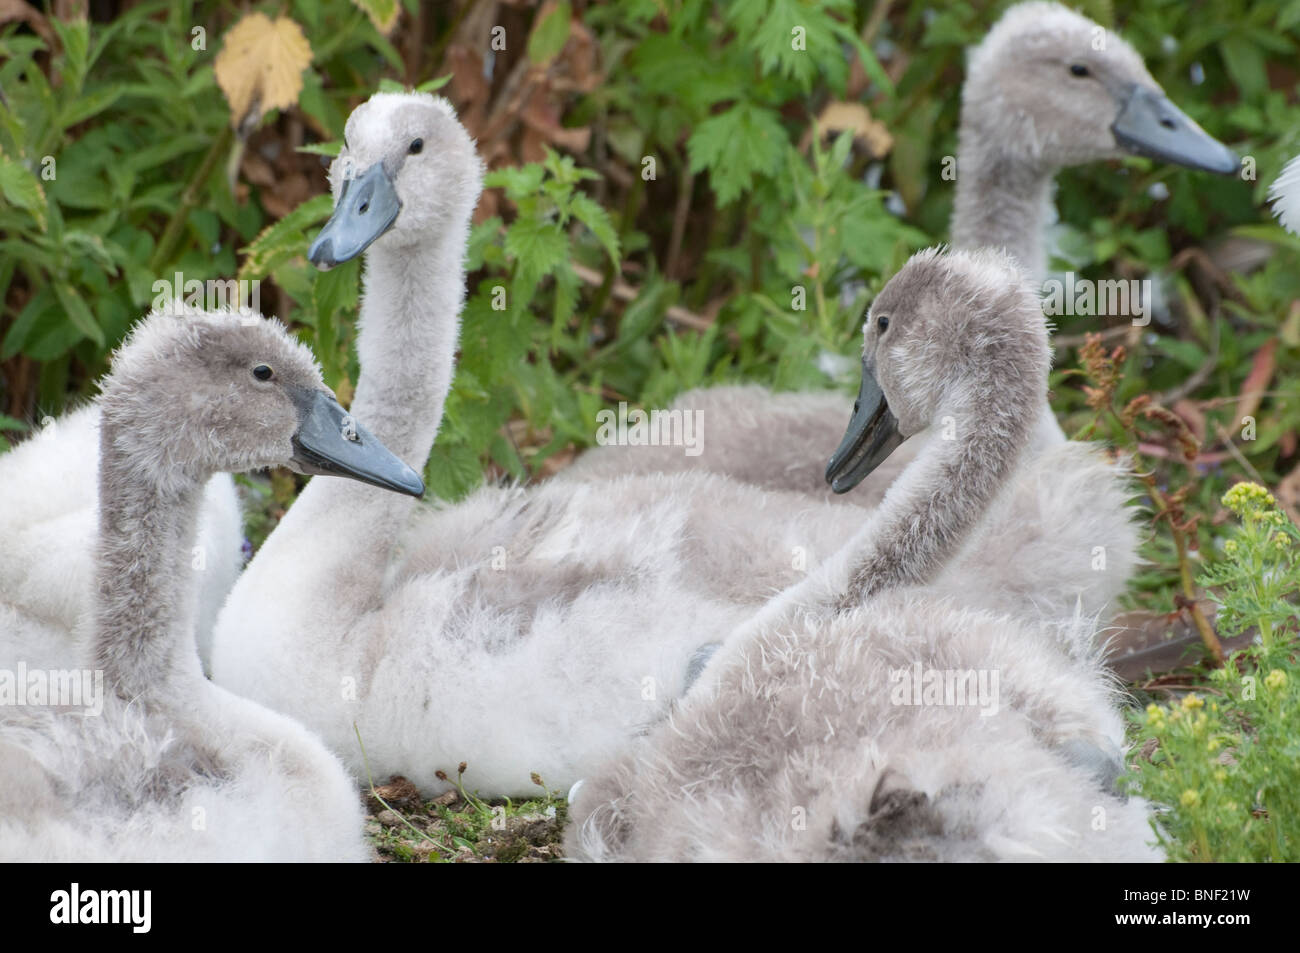 A group of swan signets, sitting on grass. Stock Photo